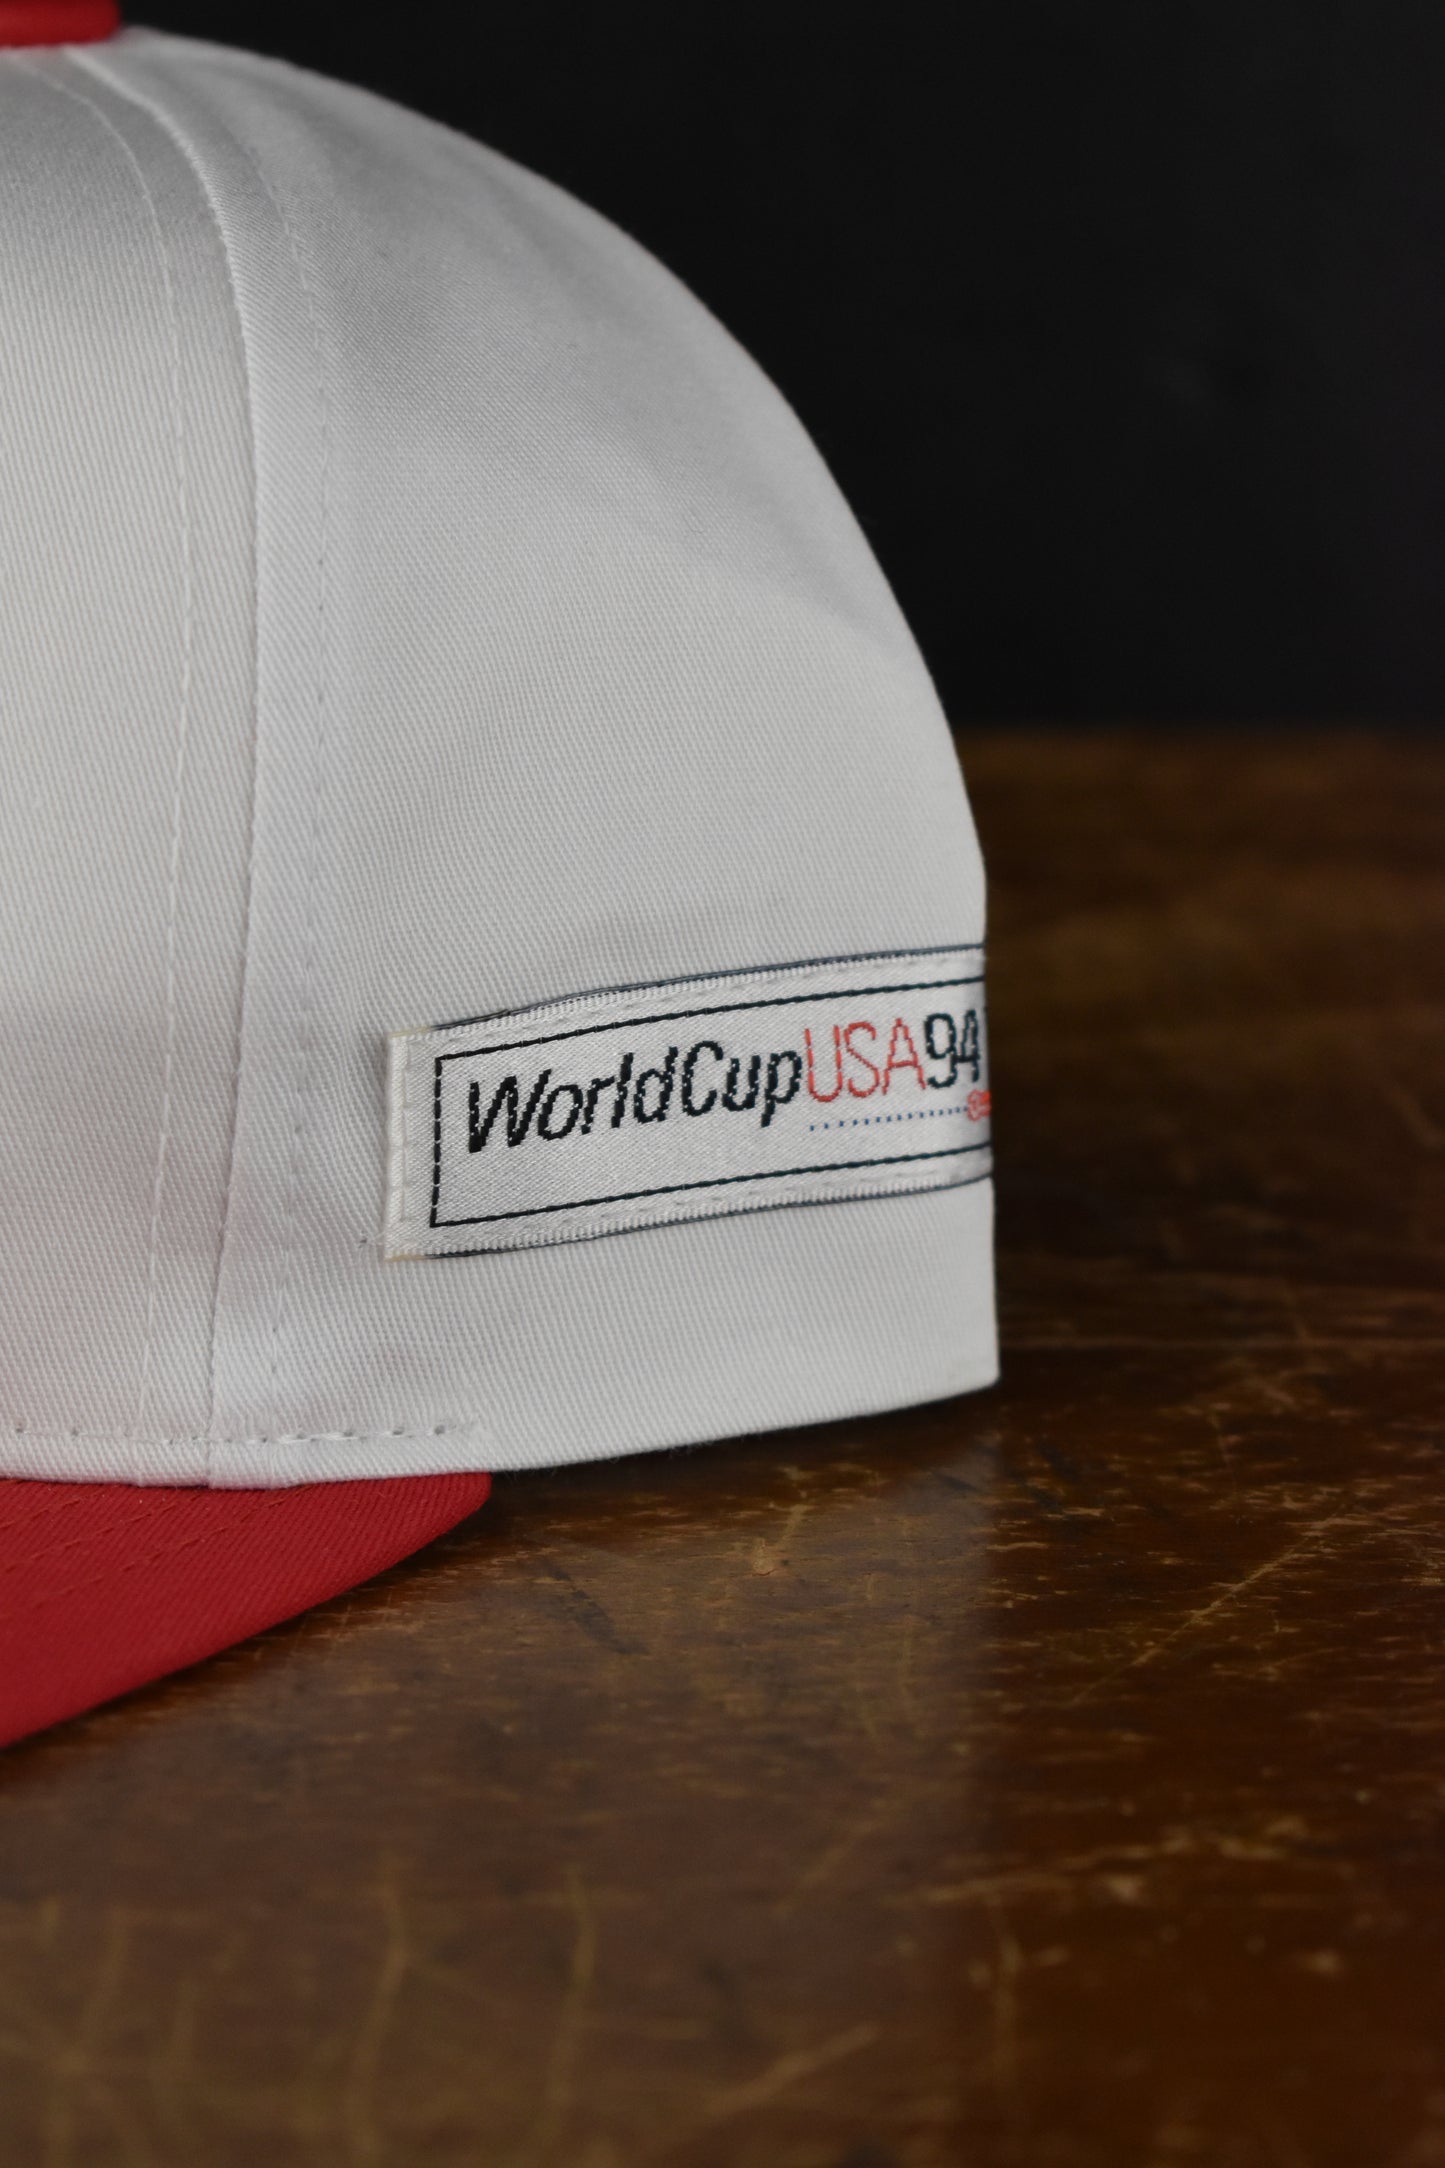 ‘94 World Cup Soccer Hat